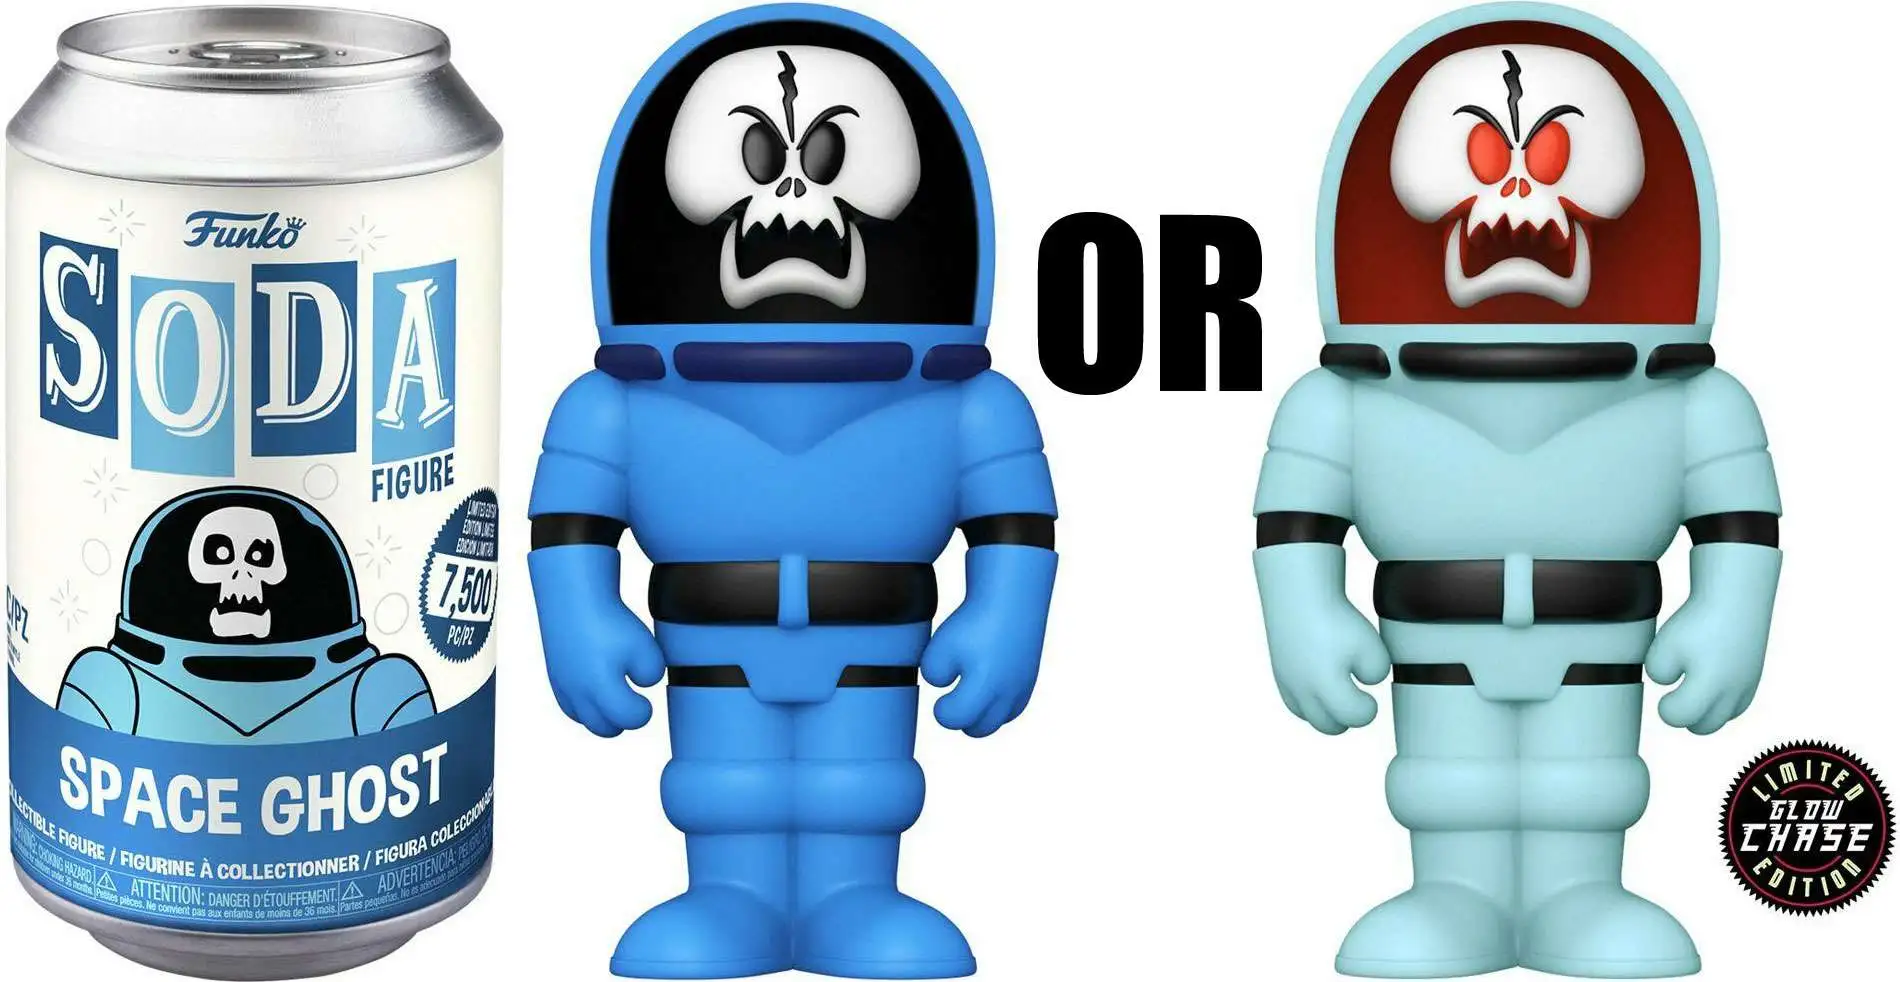 Funko Scooby Doo Vinyl Soda Space Ghost Limited Edition of 7,500! Figure [1 RANDOM Figure, Look For The Chase!]